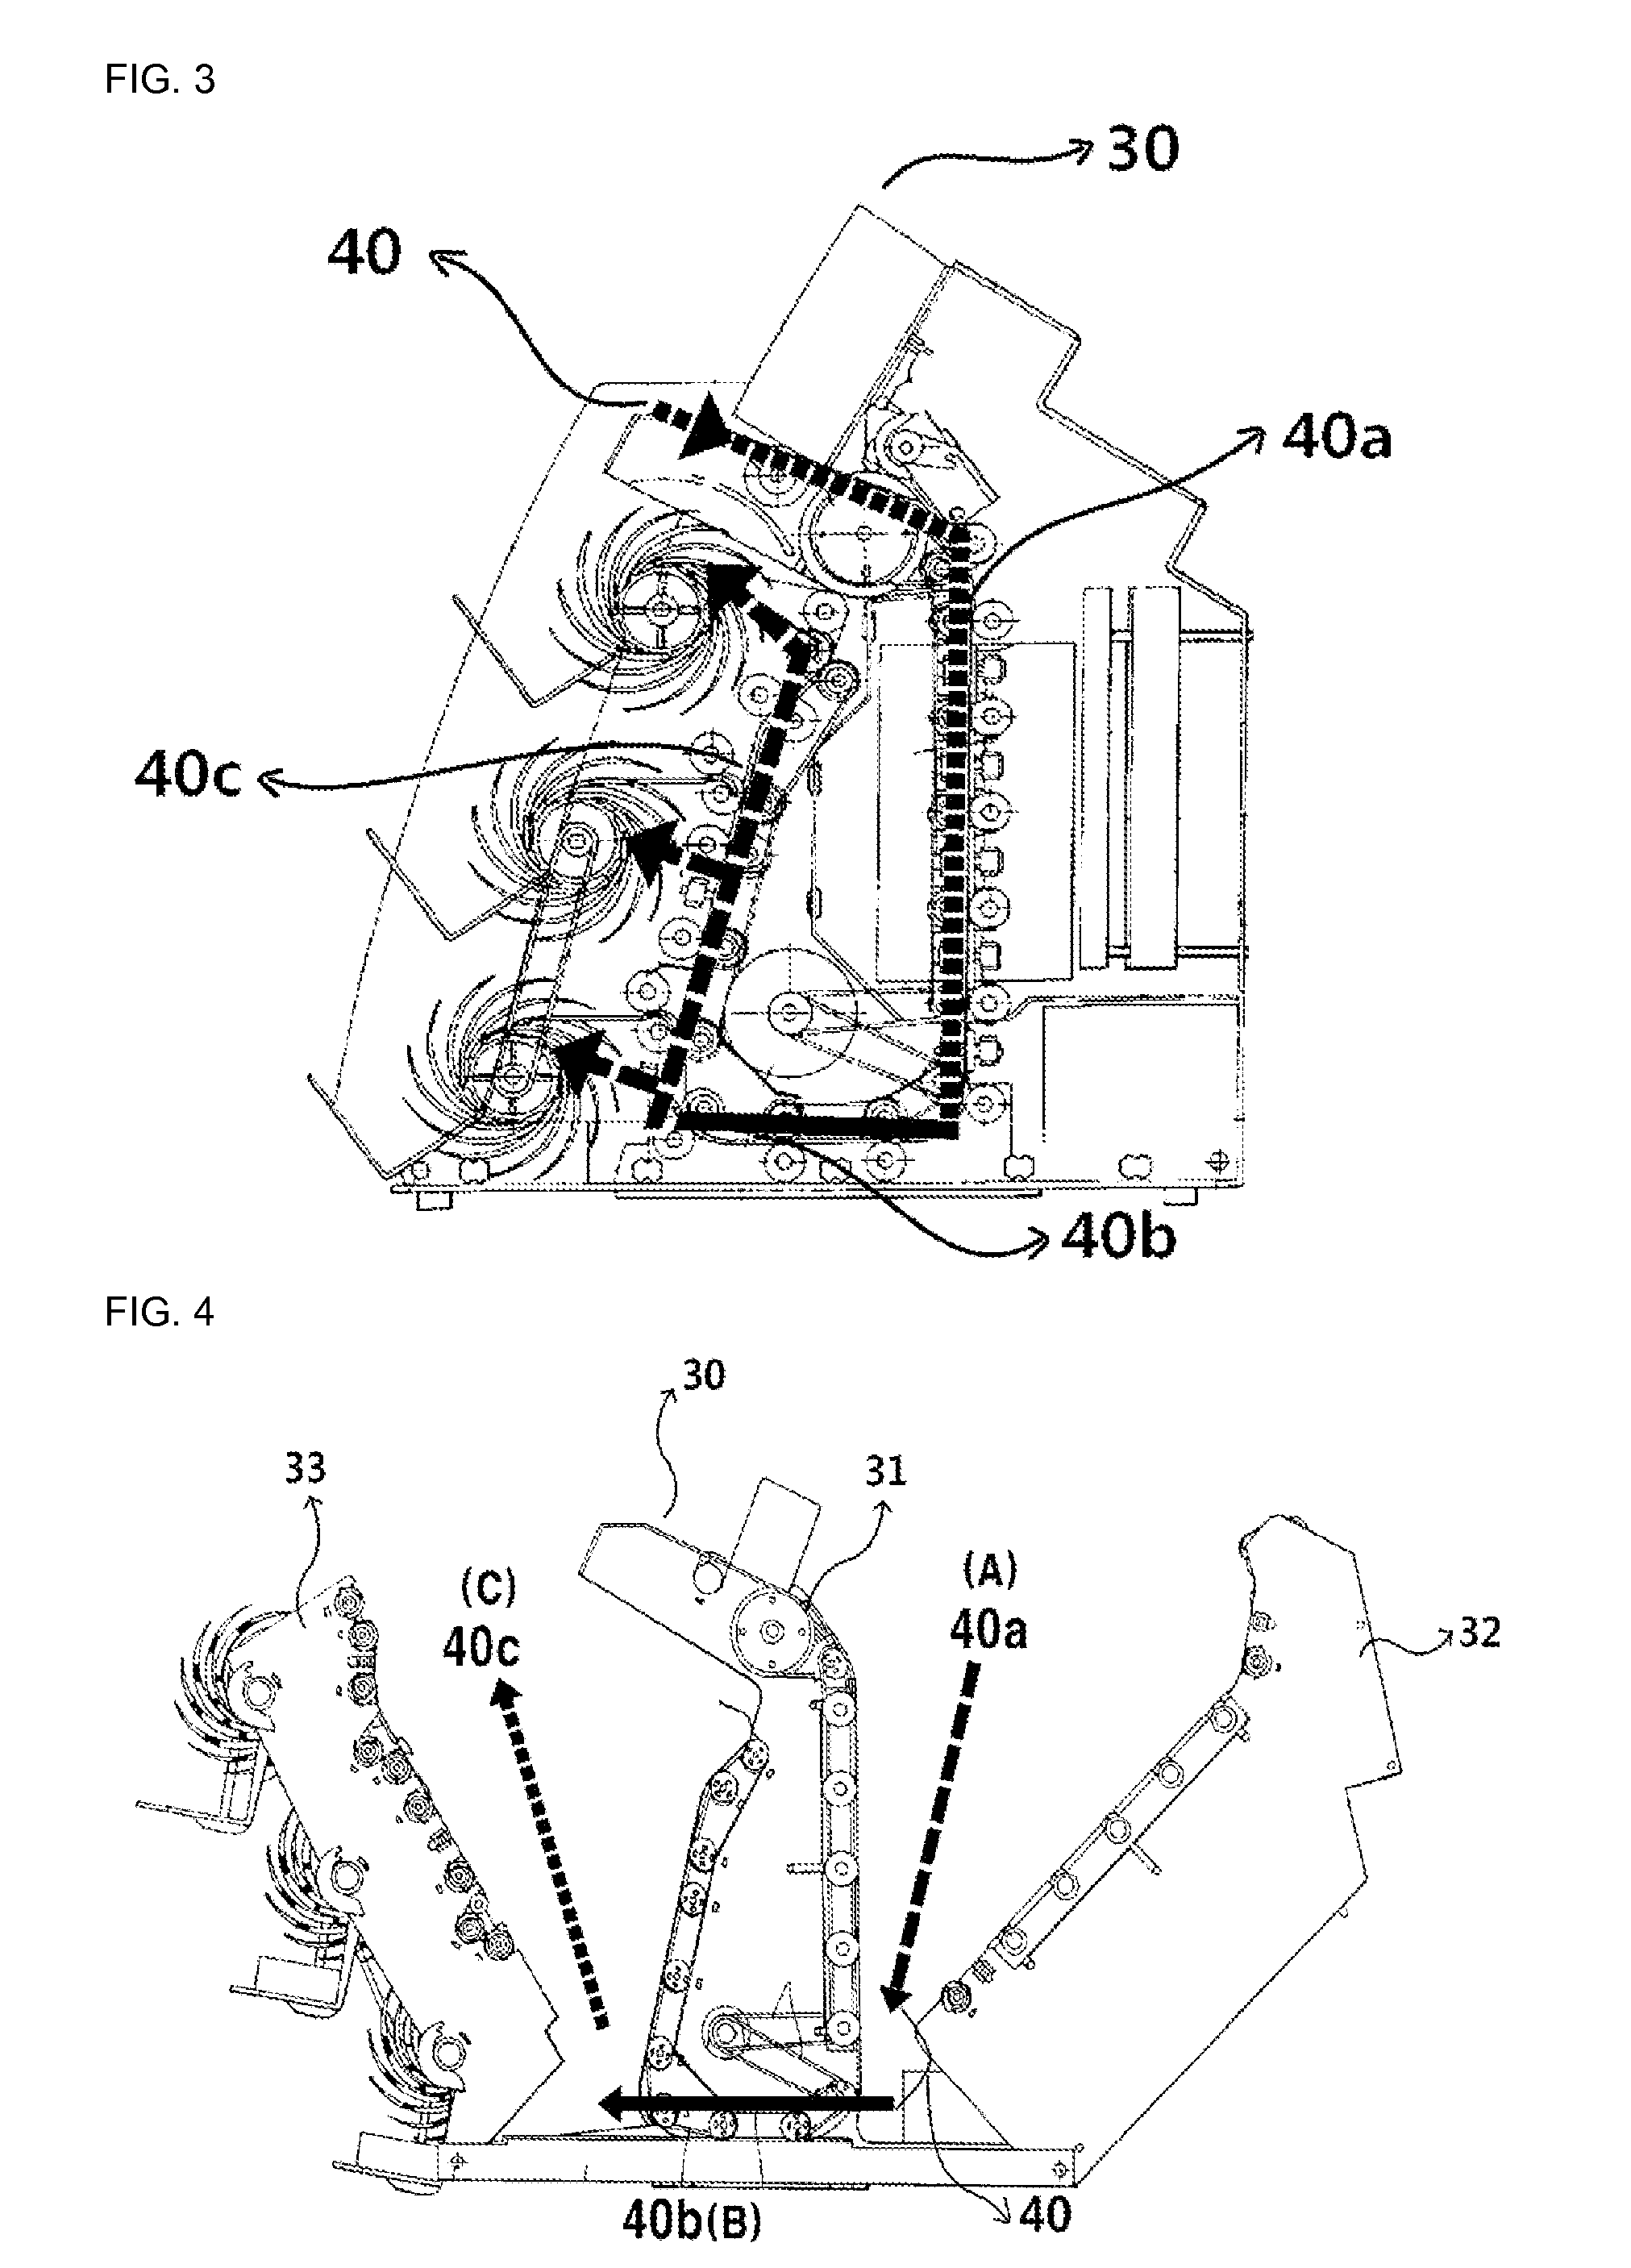 Paper Money Processing Apparatus Having Structure for Easily Preventing Paper Money Jams